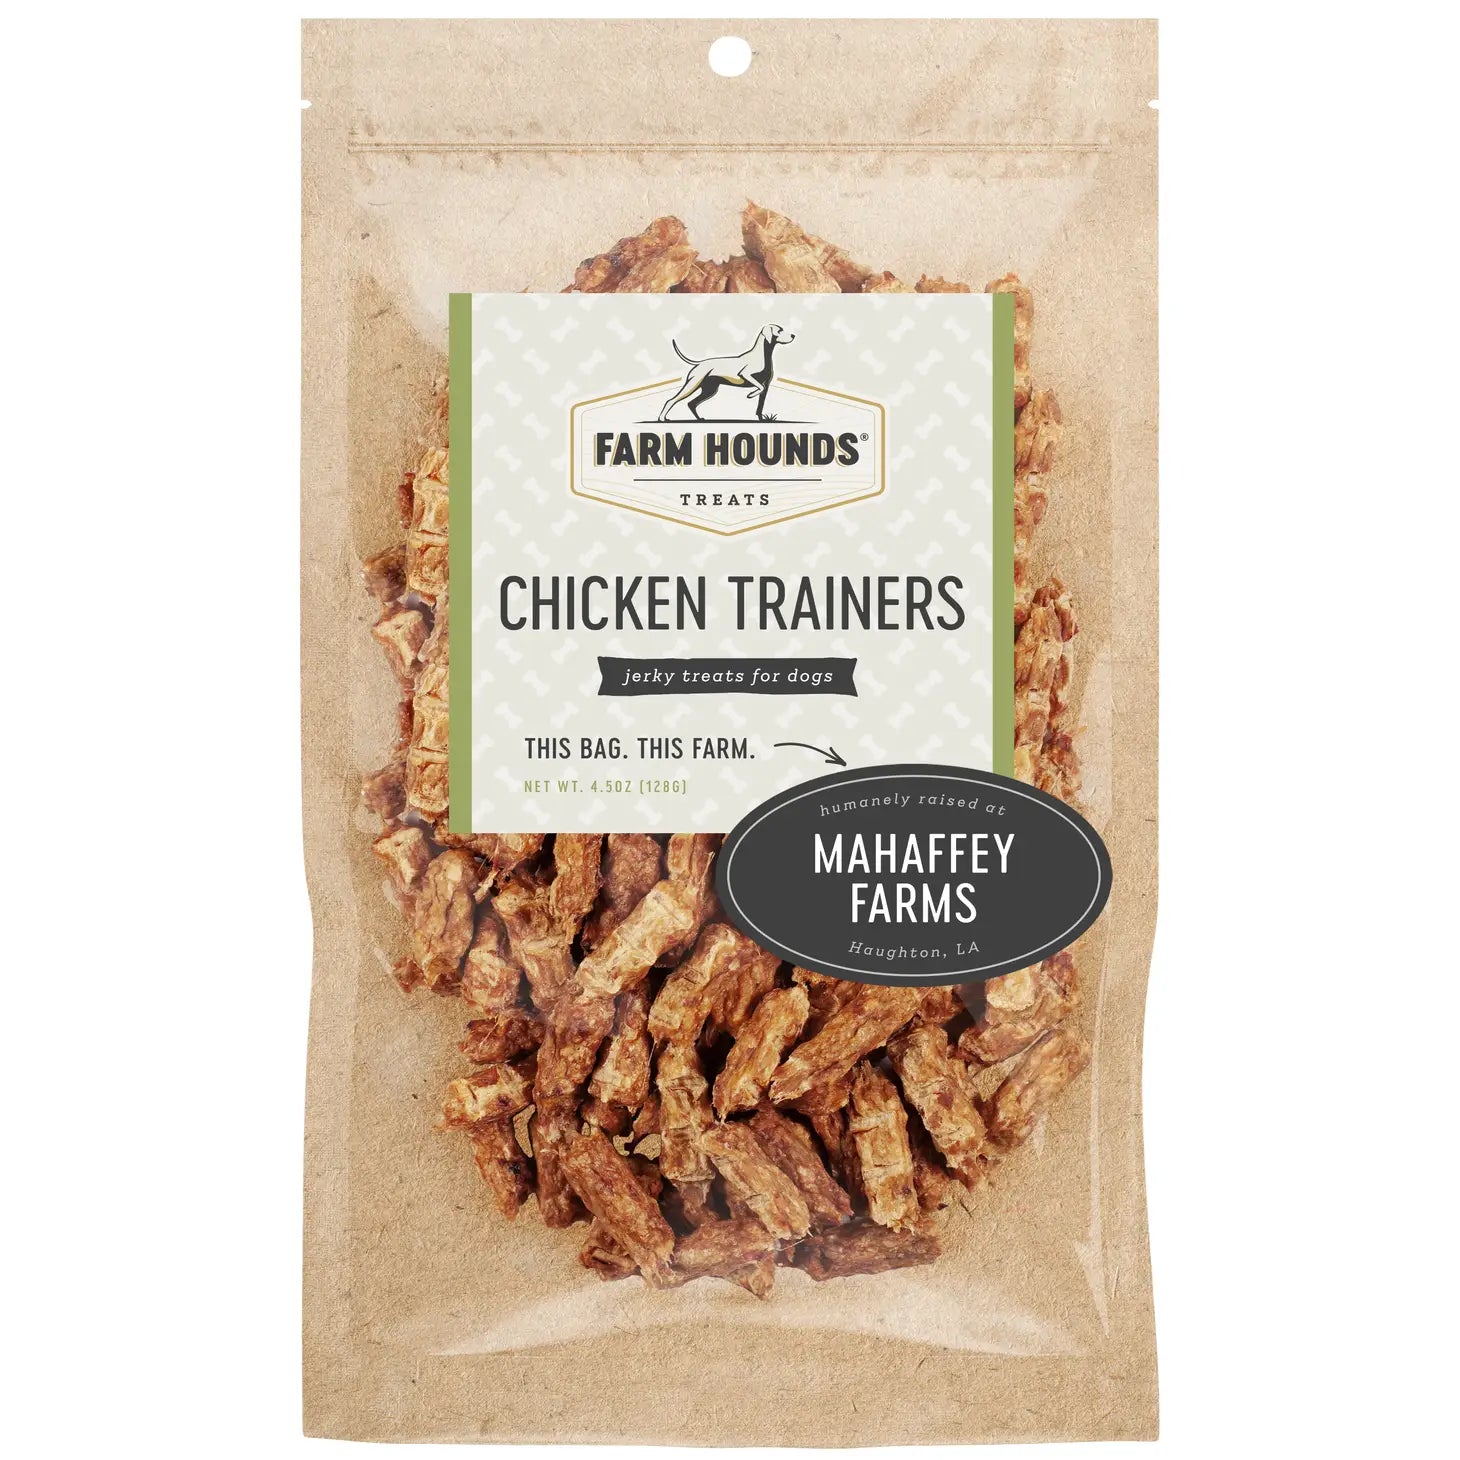 Farm Hounds Chicken Trainers for Dogs 4.5 oz Boca Delray